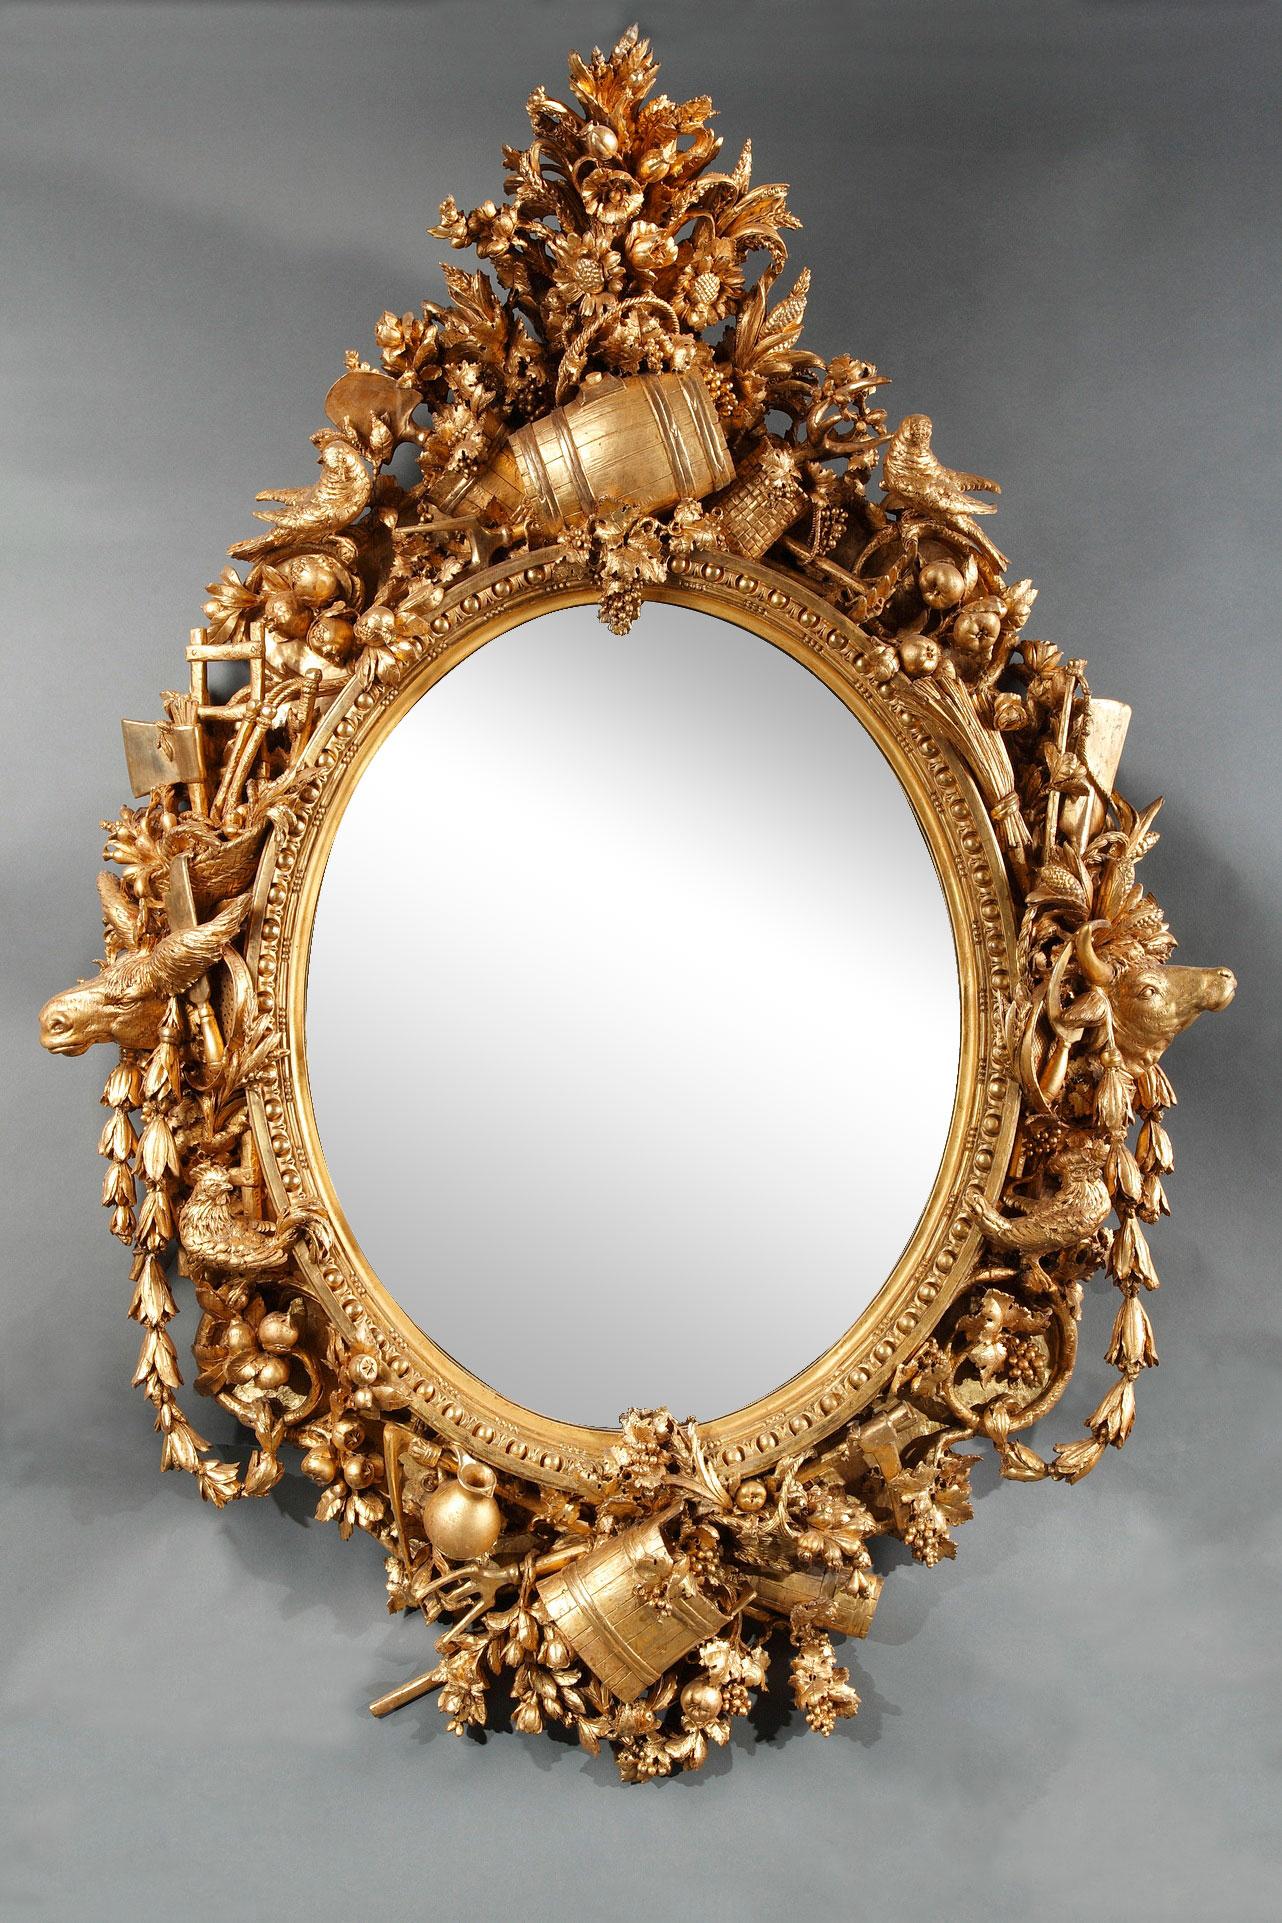 Signed on the back with a stencil « F. Quentin & C, Firenze »

Exceptional oval mirror in delicately carved and gilded wood. The frame, underlined in its center by a frieze of ovals and a beaded frieze, is adorned with a luxuriant country decor in